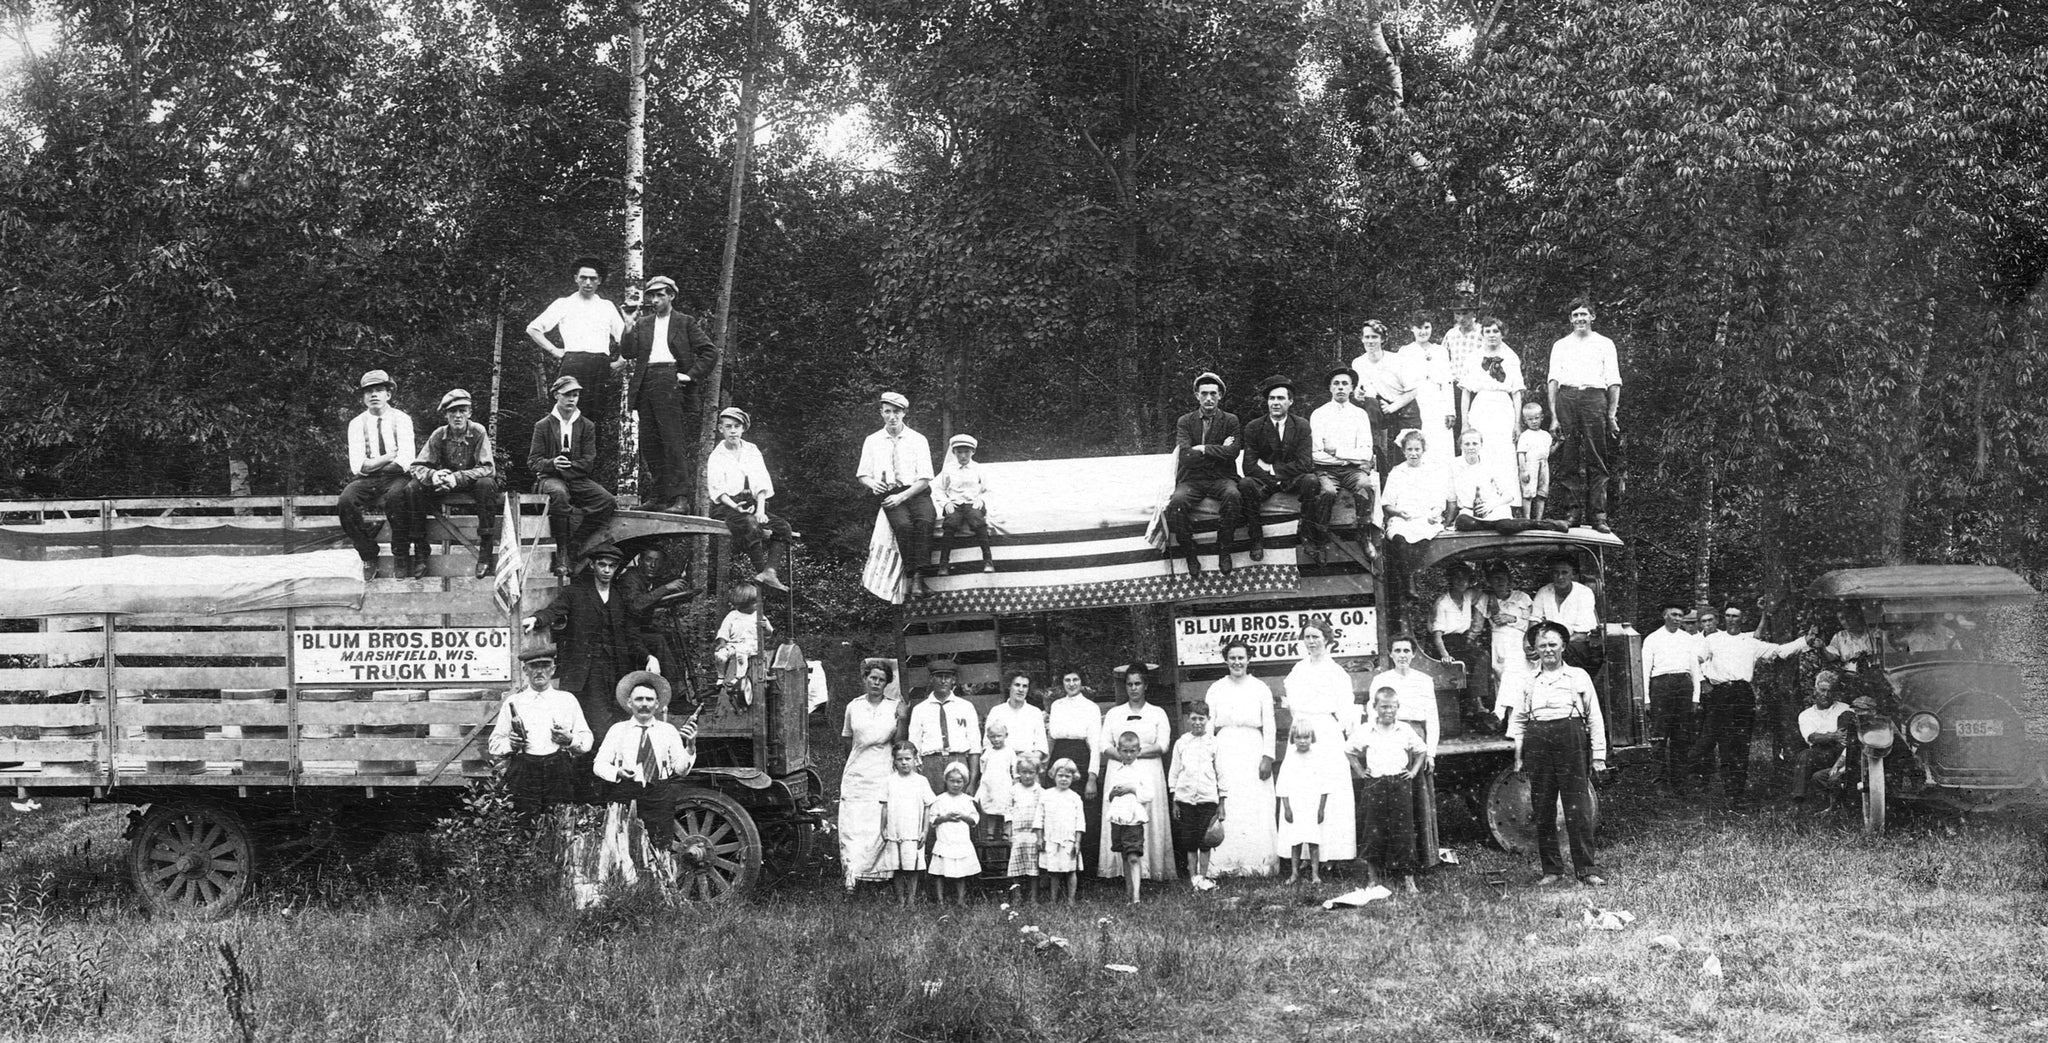 The Blum company picnic in 1910. The Blum brothers, John and Paul, owned the Blum Brothers Box Company and the Wisconsin Butter Tub Company. -- Courtesy North Wood County Historical Society / #C112.15